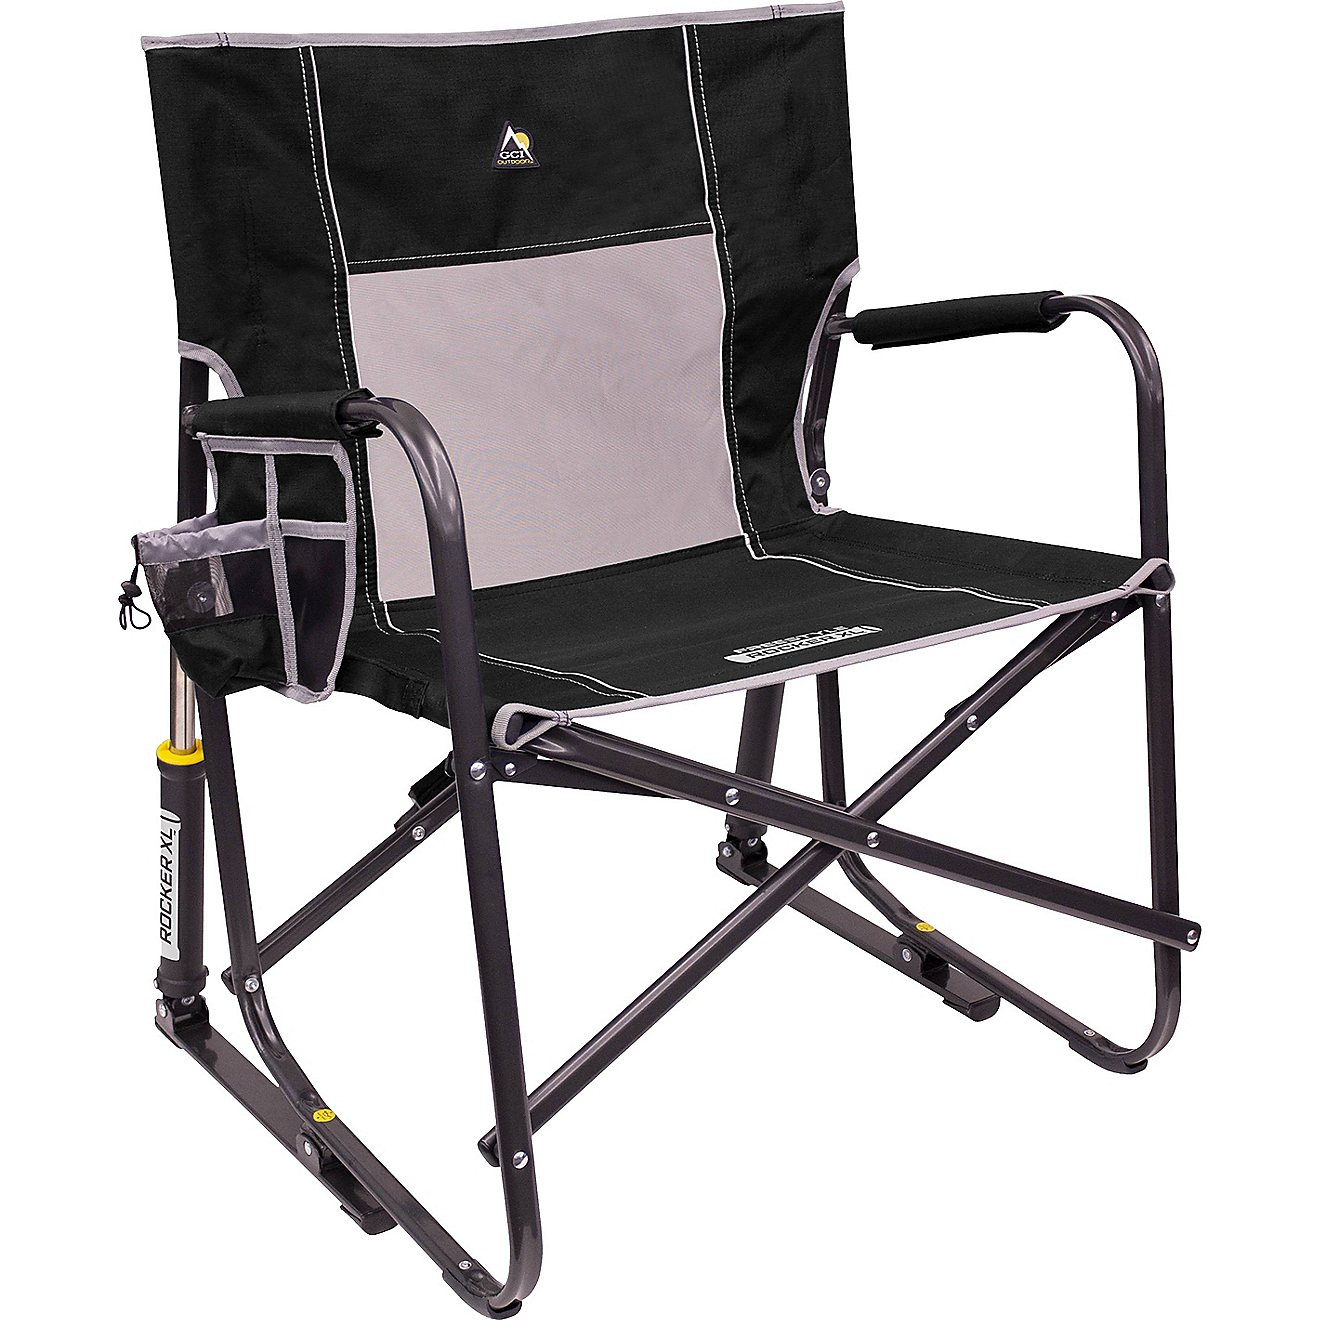 Gci Outdoor Xl Freestyle Rocker Academy, Rocking Folding Chairs Outdoor